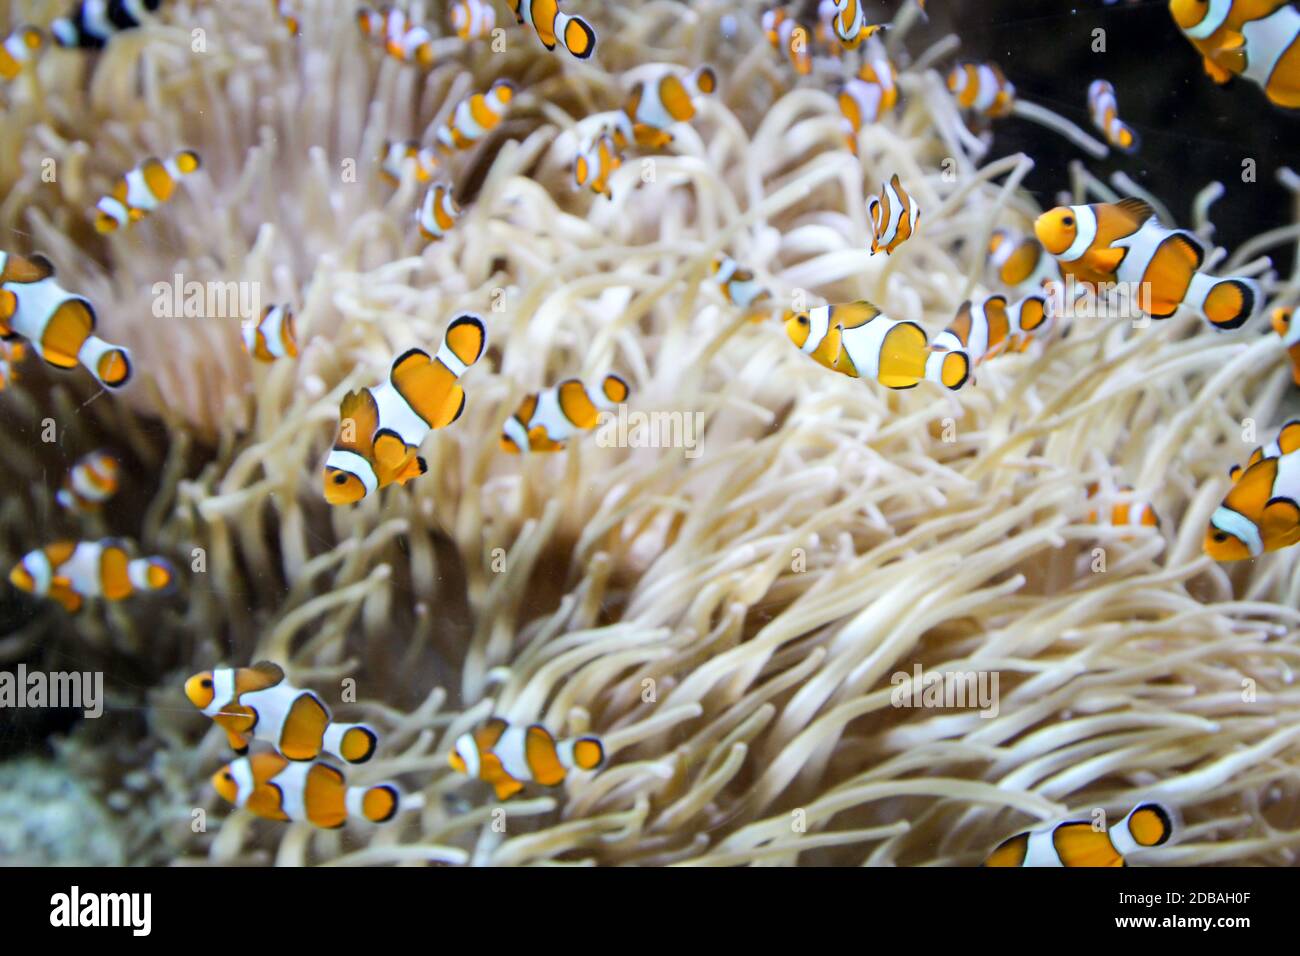 Anemonefish in their anemone which they care for and keep healthy Stock Photo